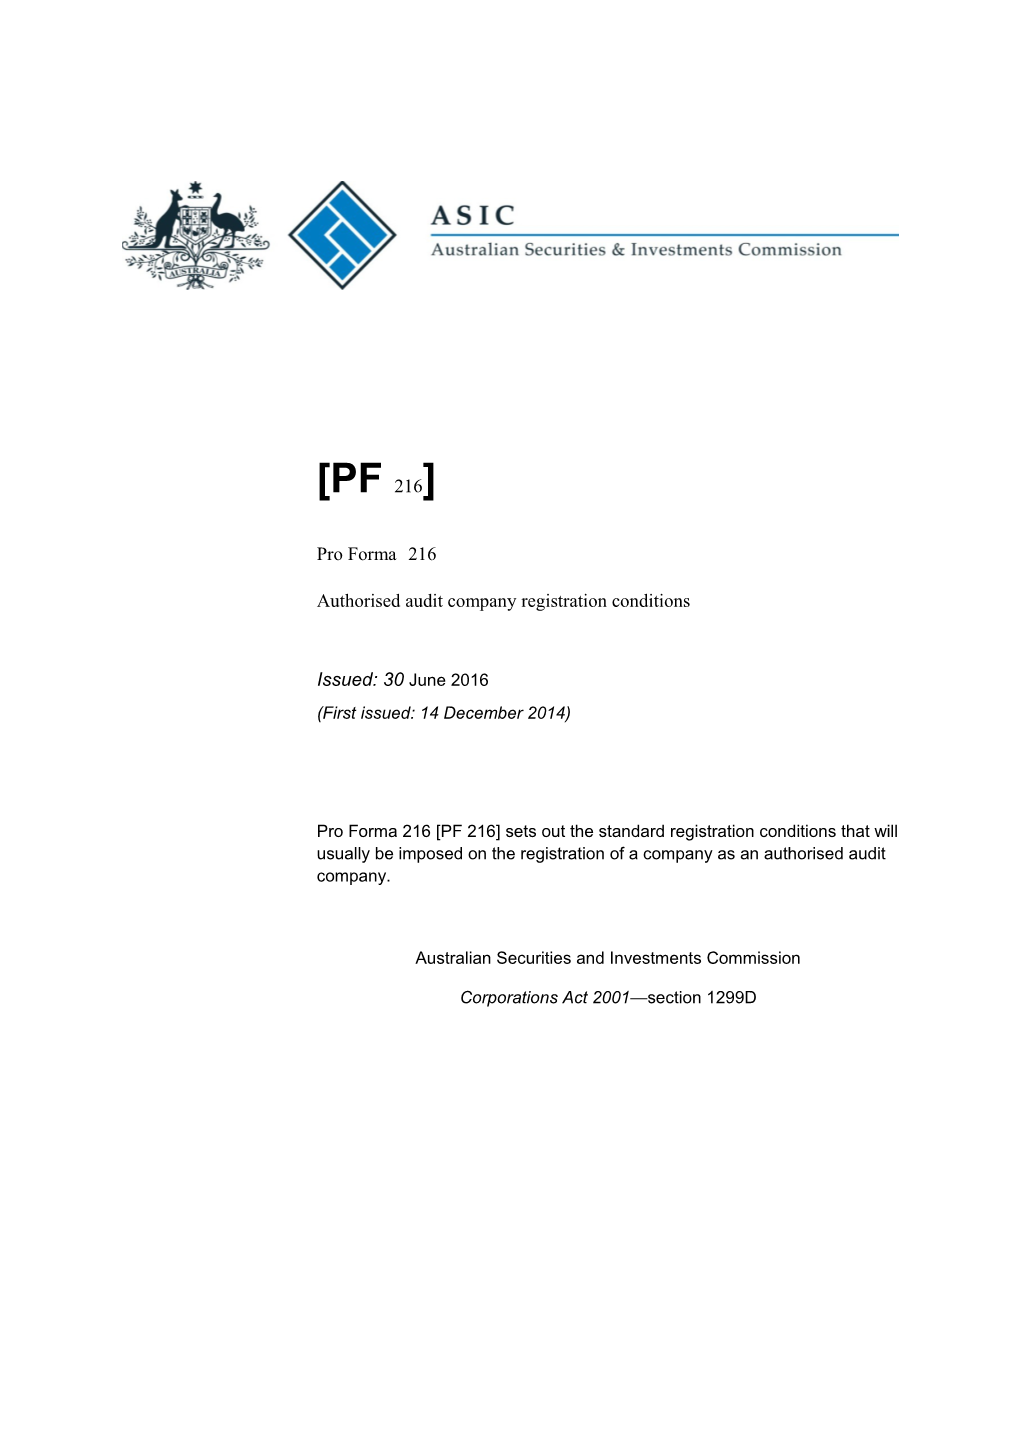 PRO FORMA PF 216 Authorised Audit Company Registration Conditions